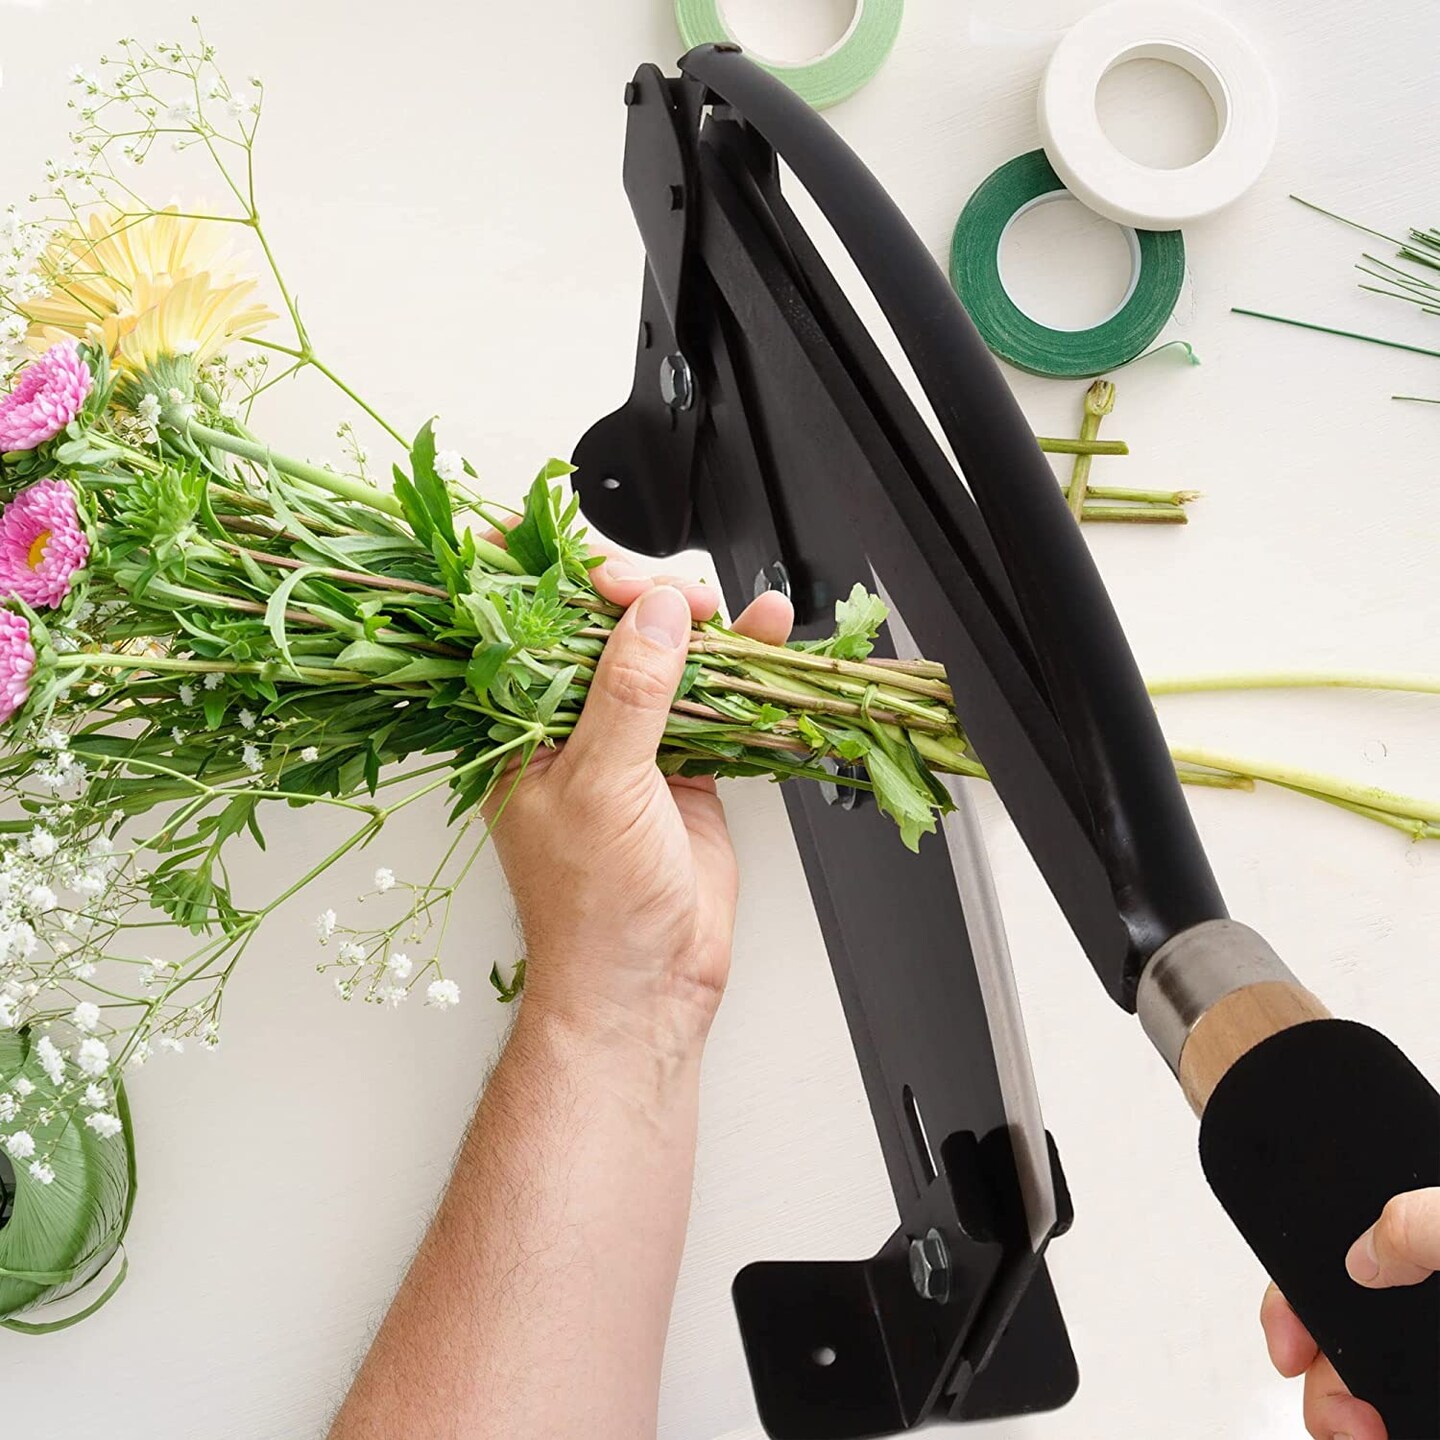 Sharp Cuts: 14 Blade Fresh Flower Stem Cutter with Comfort Hand Grip and  Safety Lock - Perfect for Florists and DIY Flower Arrangement Making